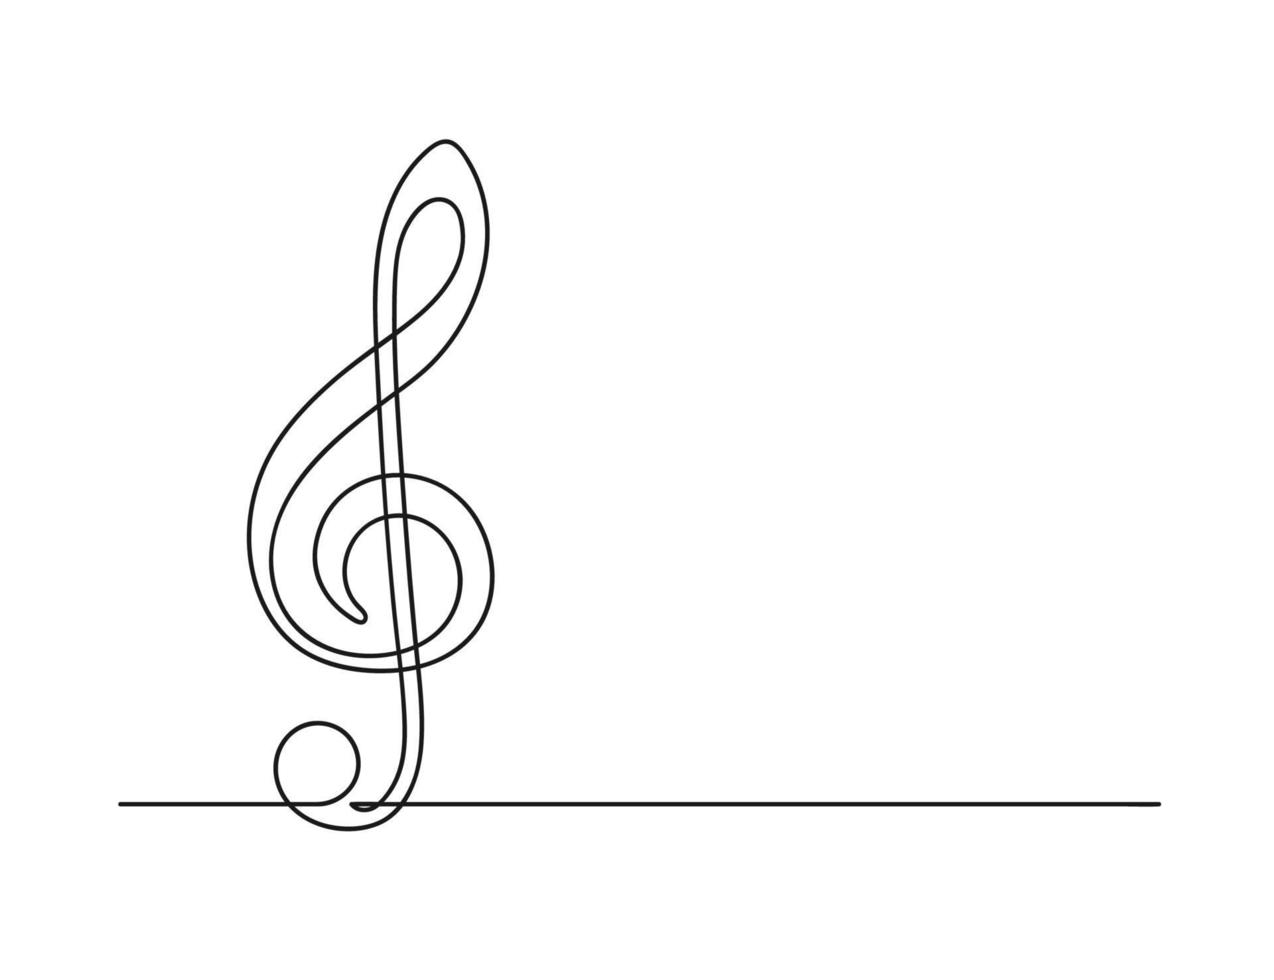 Continuous one line drawing of a treble clef vector